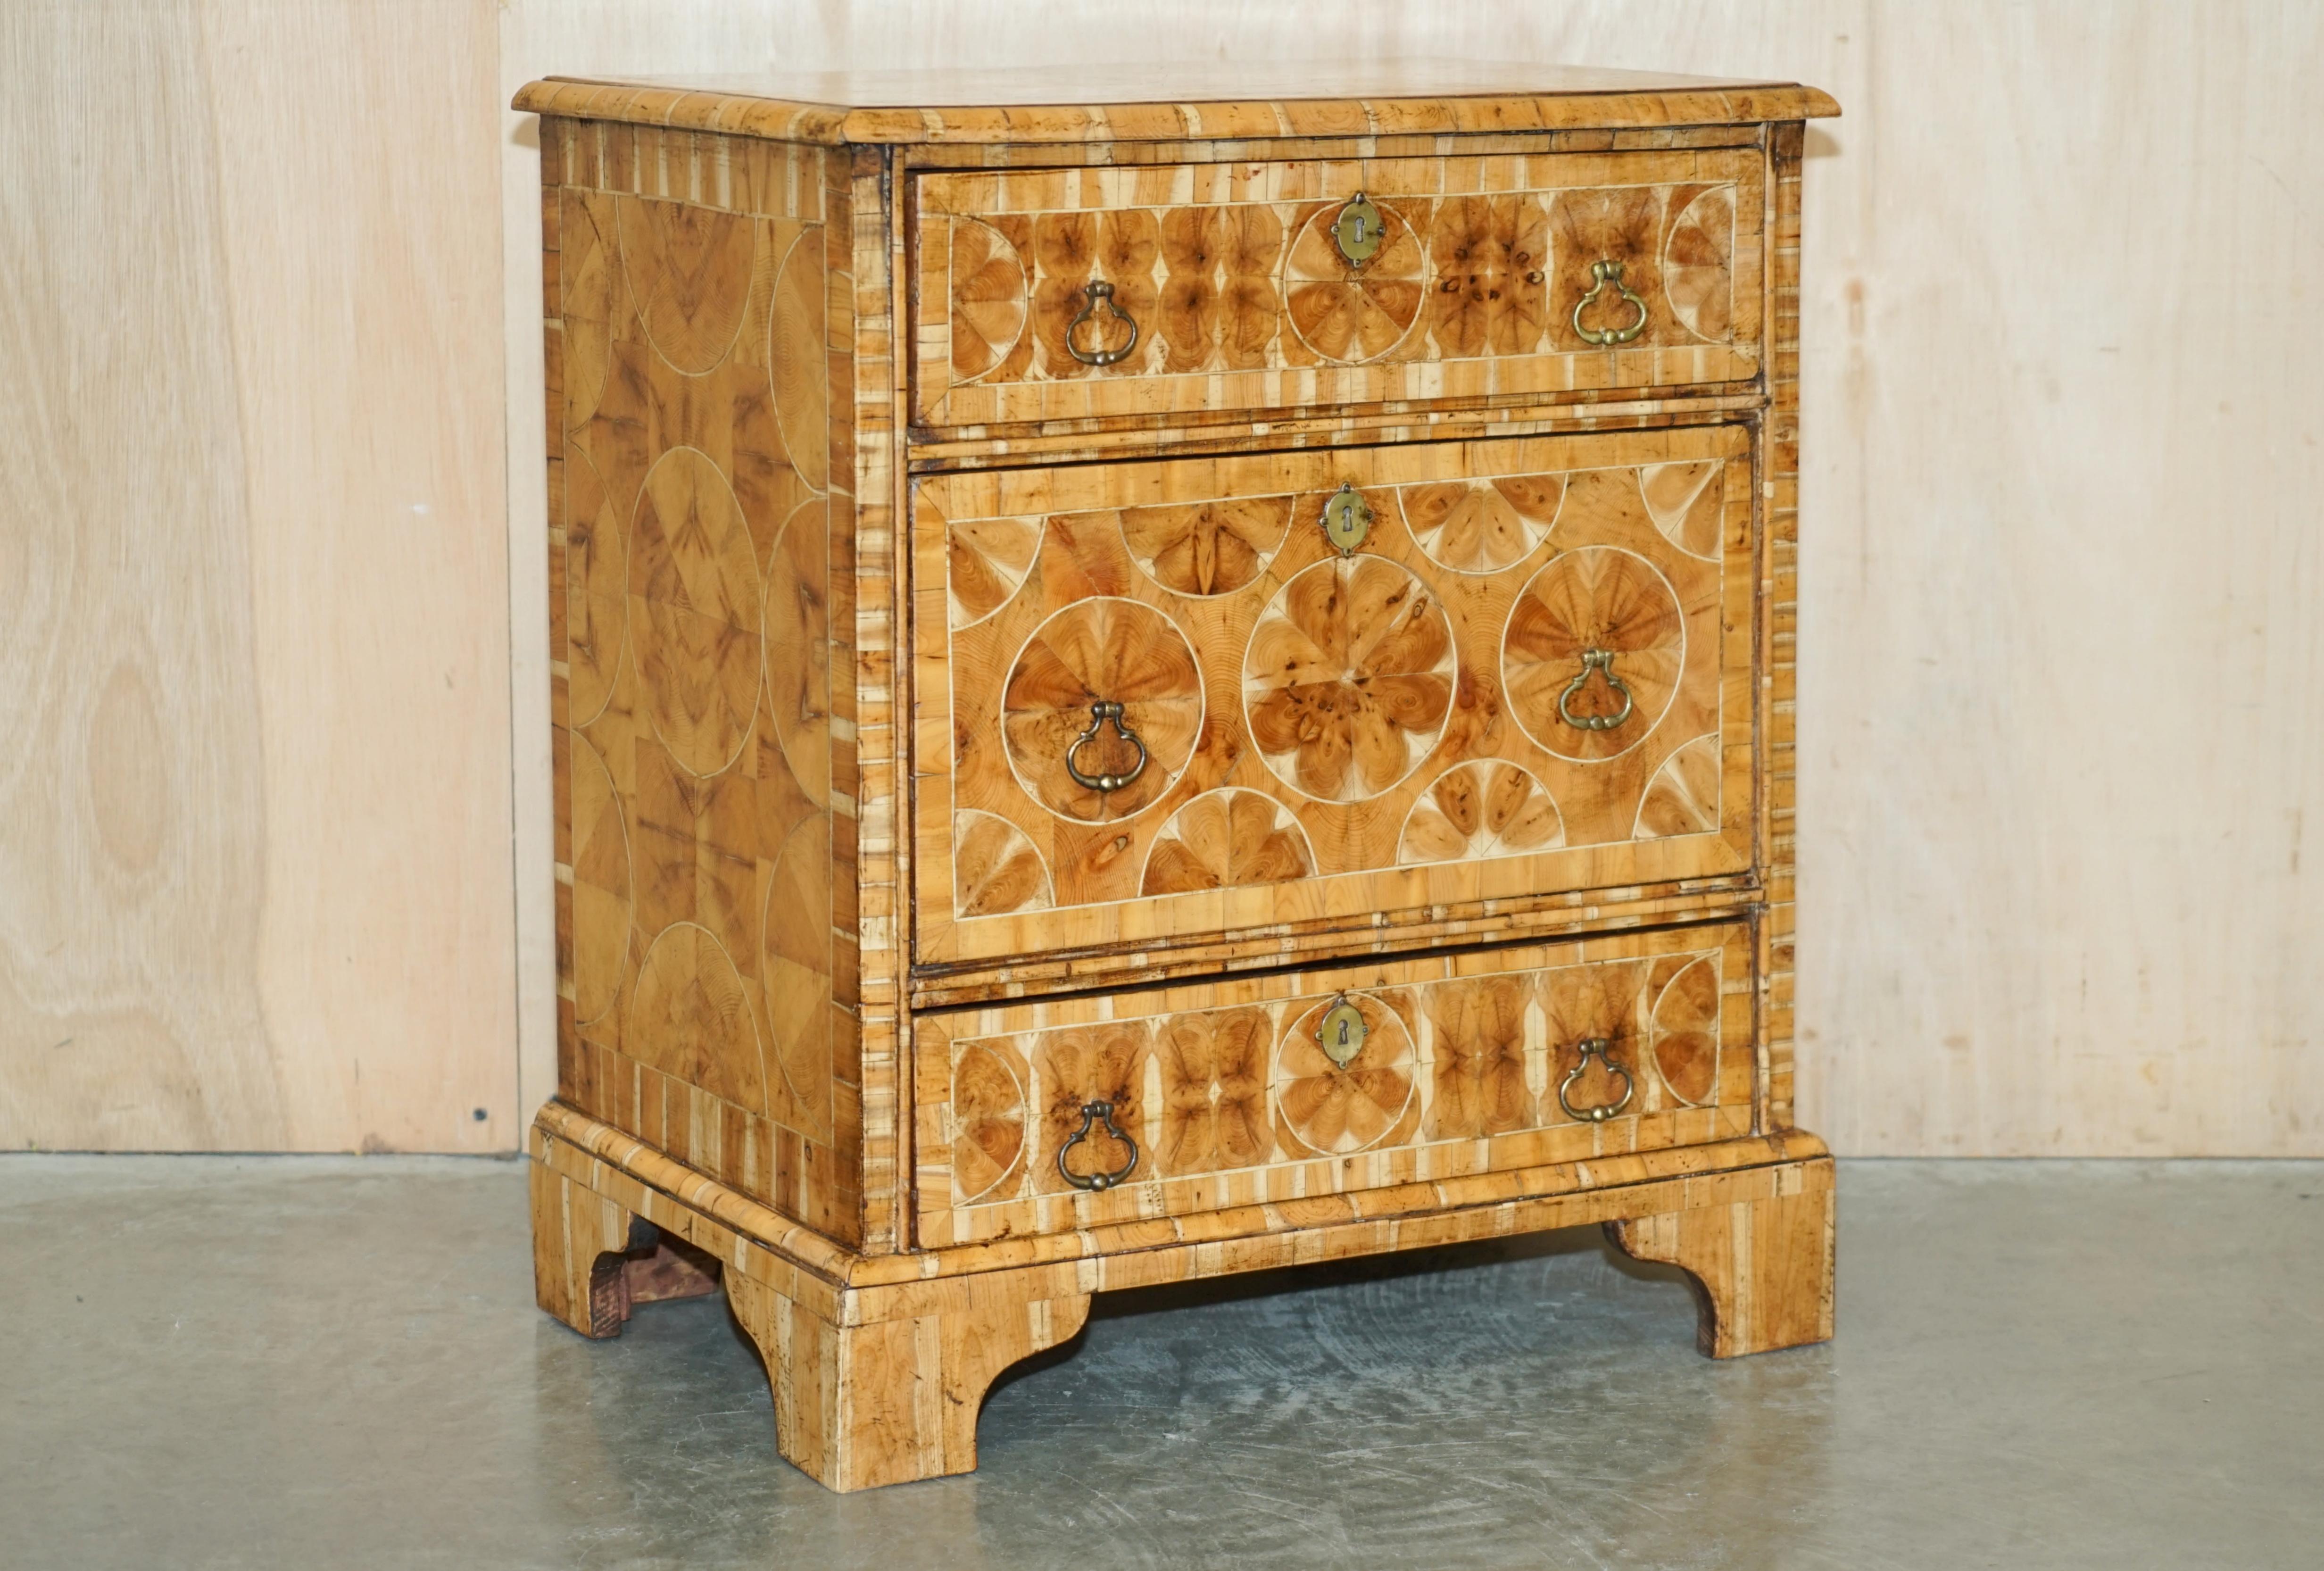 We are delighted to offer for sale this absolute work of Art of a nightstand sized Chest of Drawers in pine with Oyster / Laburnum wood finish which dates to the end of the William & Mary era circa 1700

Wow, I mean just wow. This is quite simply